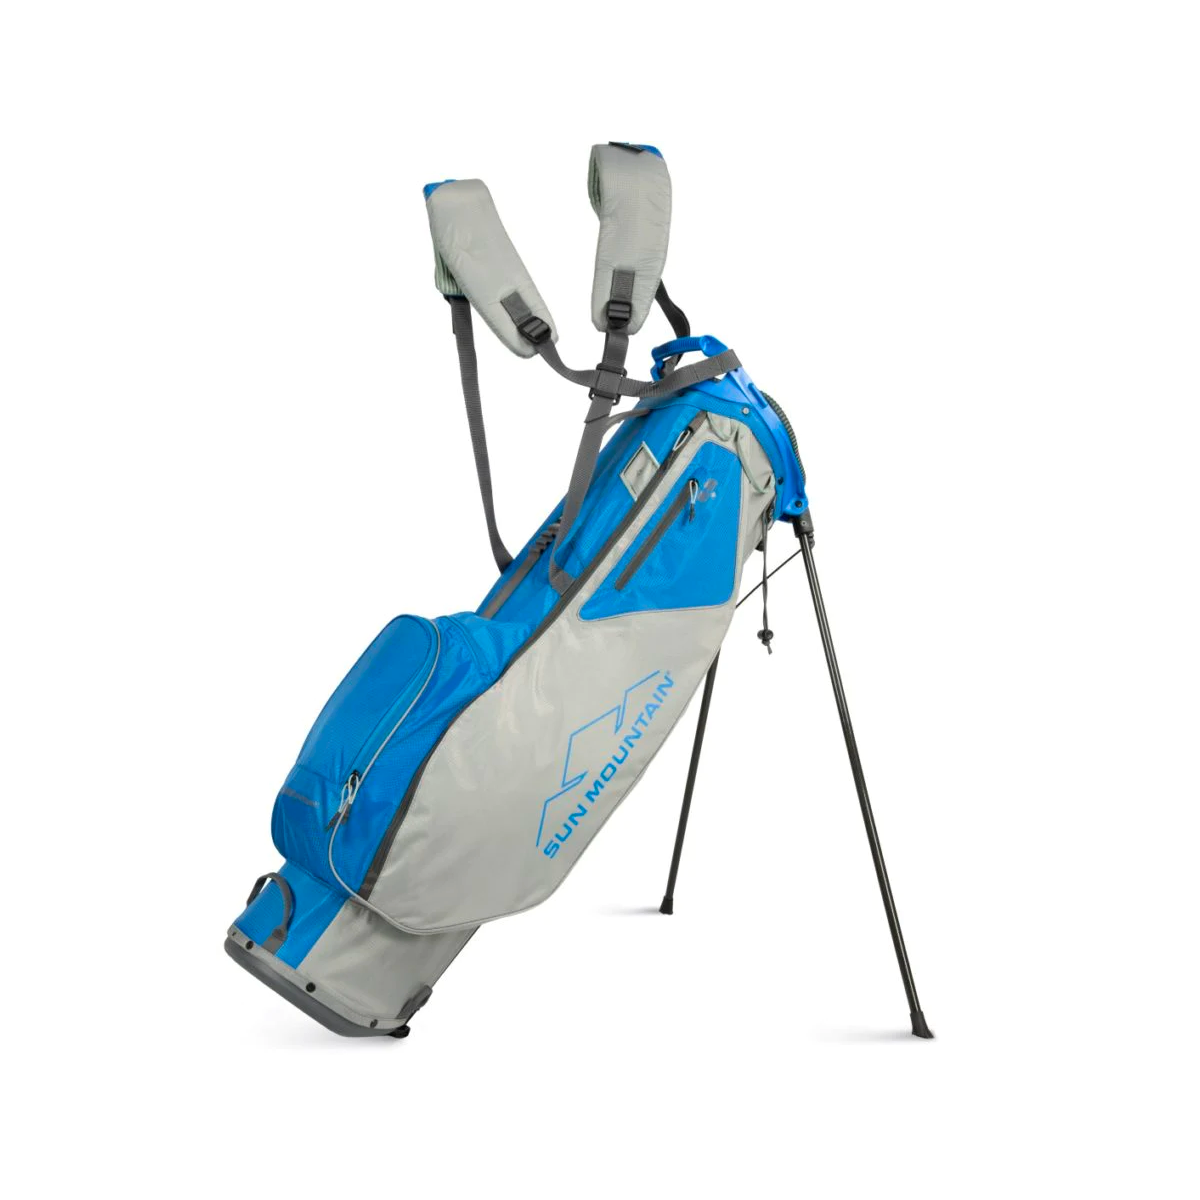 Lightweight Series Golf Bags Offer Something for Everyone